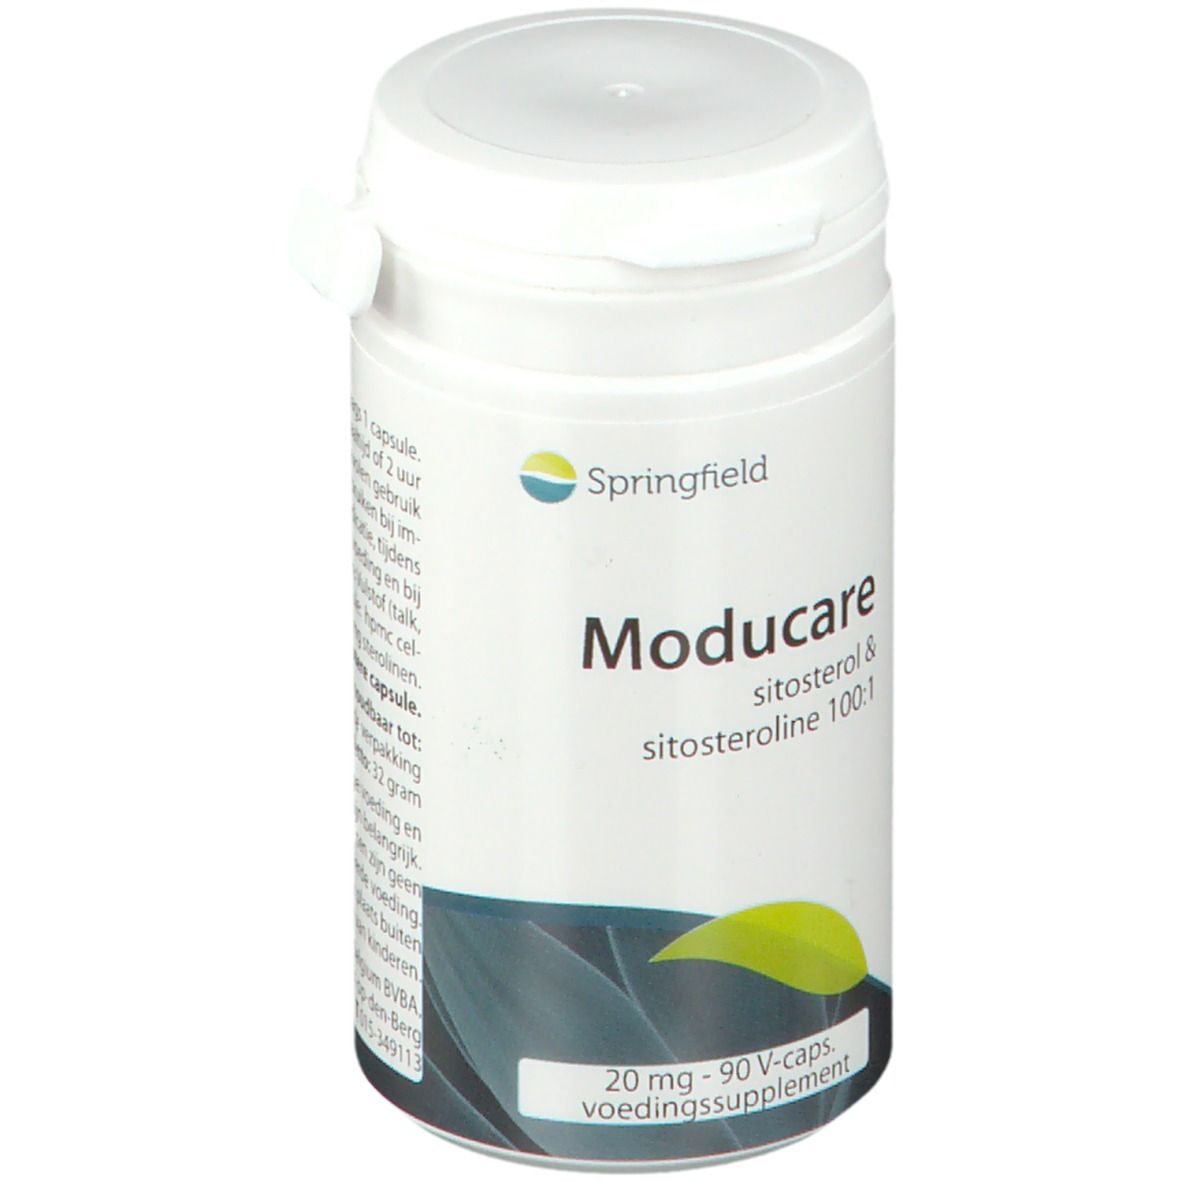 Springfield Moducare Sitosterol & Sitosteroline